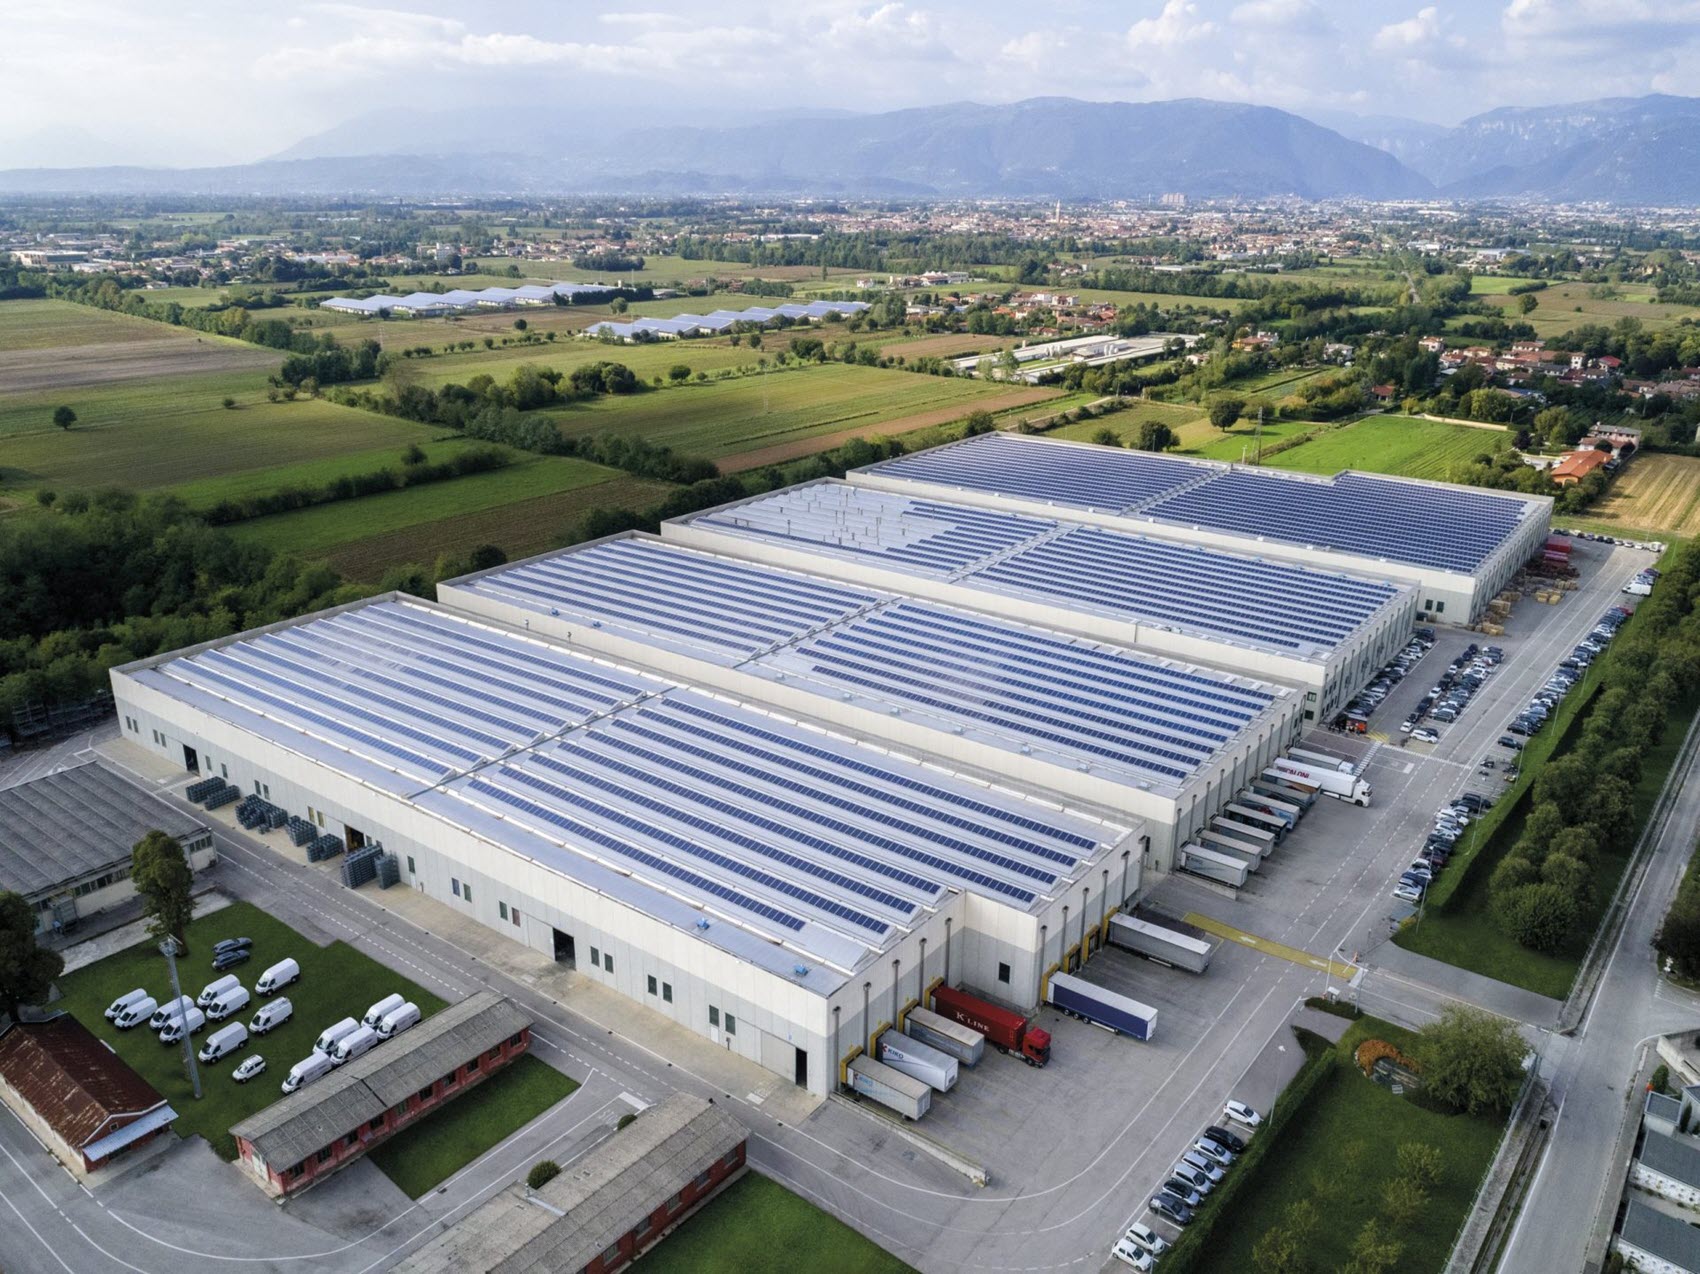 An aerial view of a large industrial facility with multiple warehouses and solar panels on the roof.